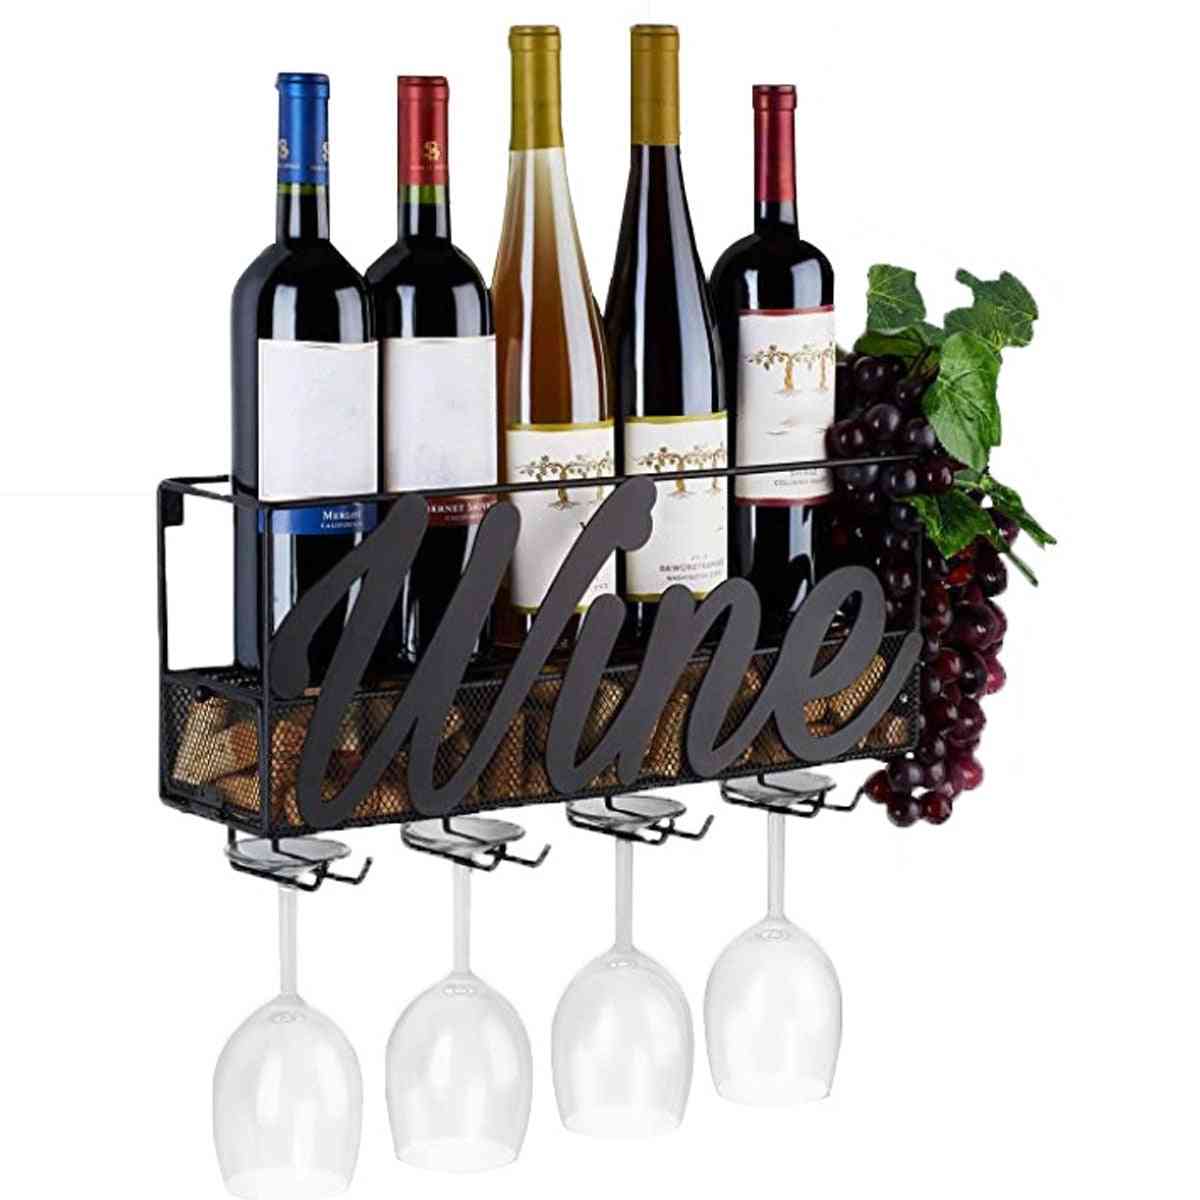 Wine Rack, Bottle Store, Wall Mounted Shelf With 4 Built-in Wine, Glass Holders